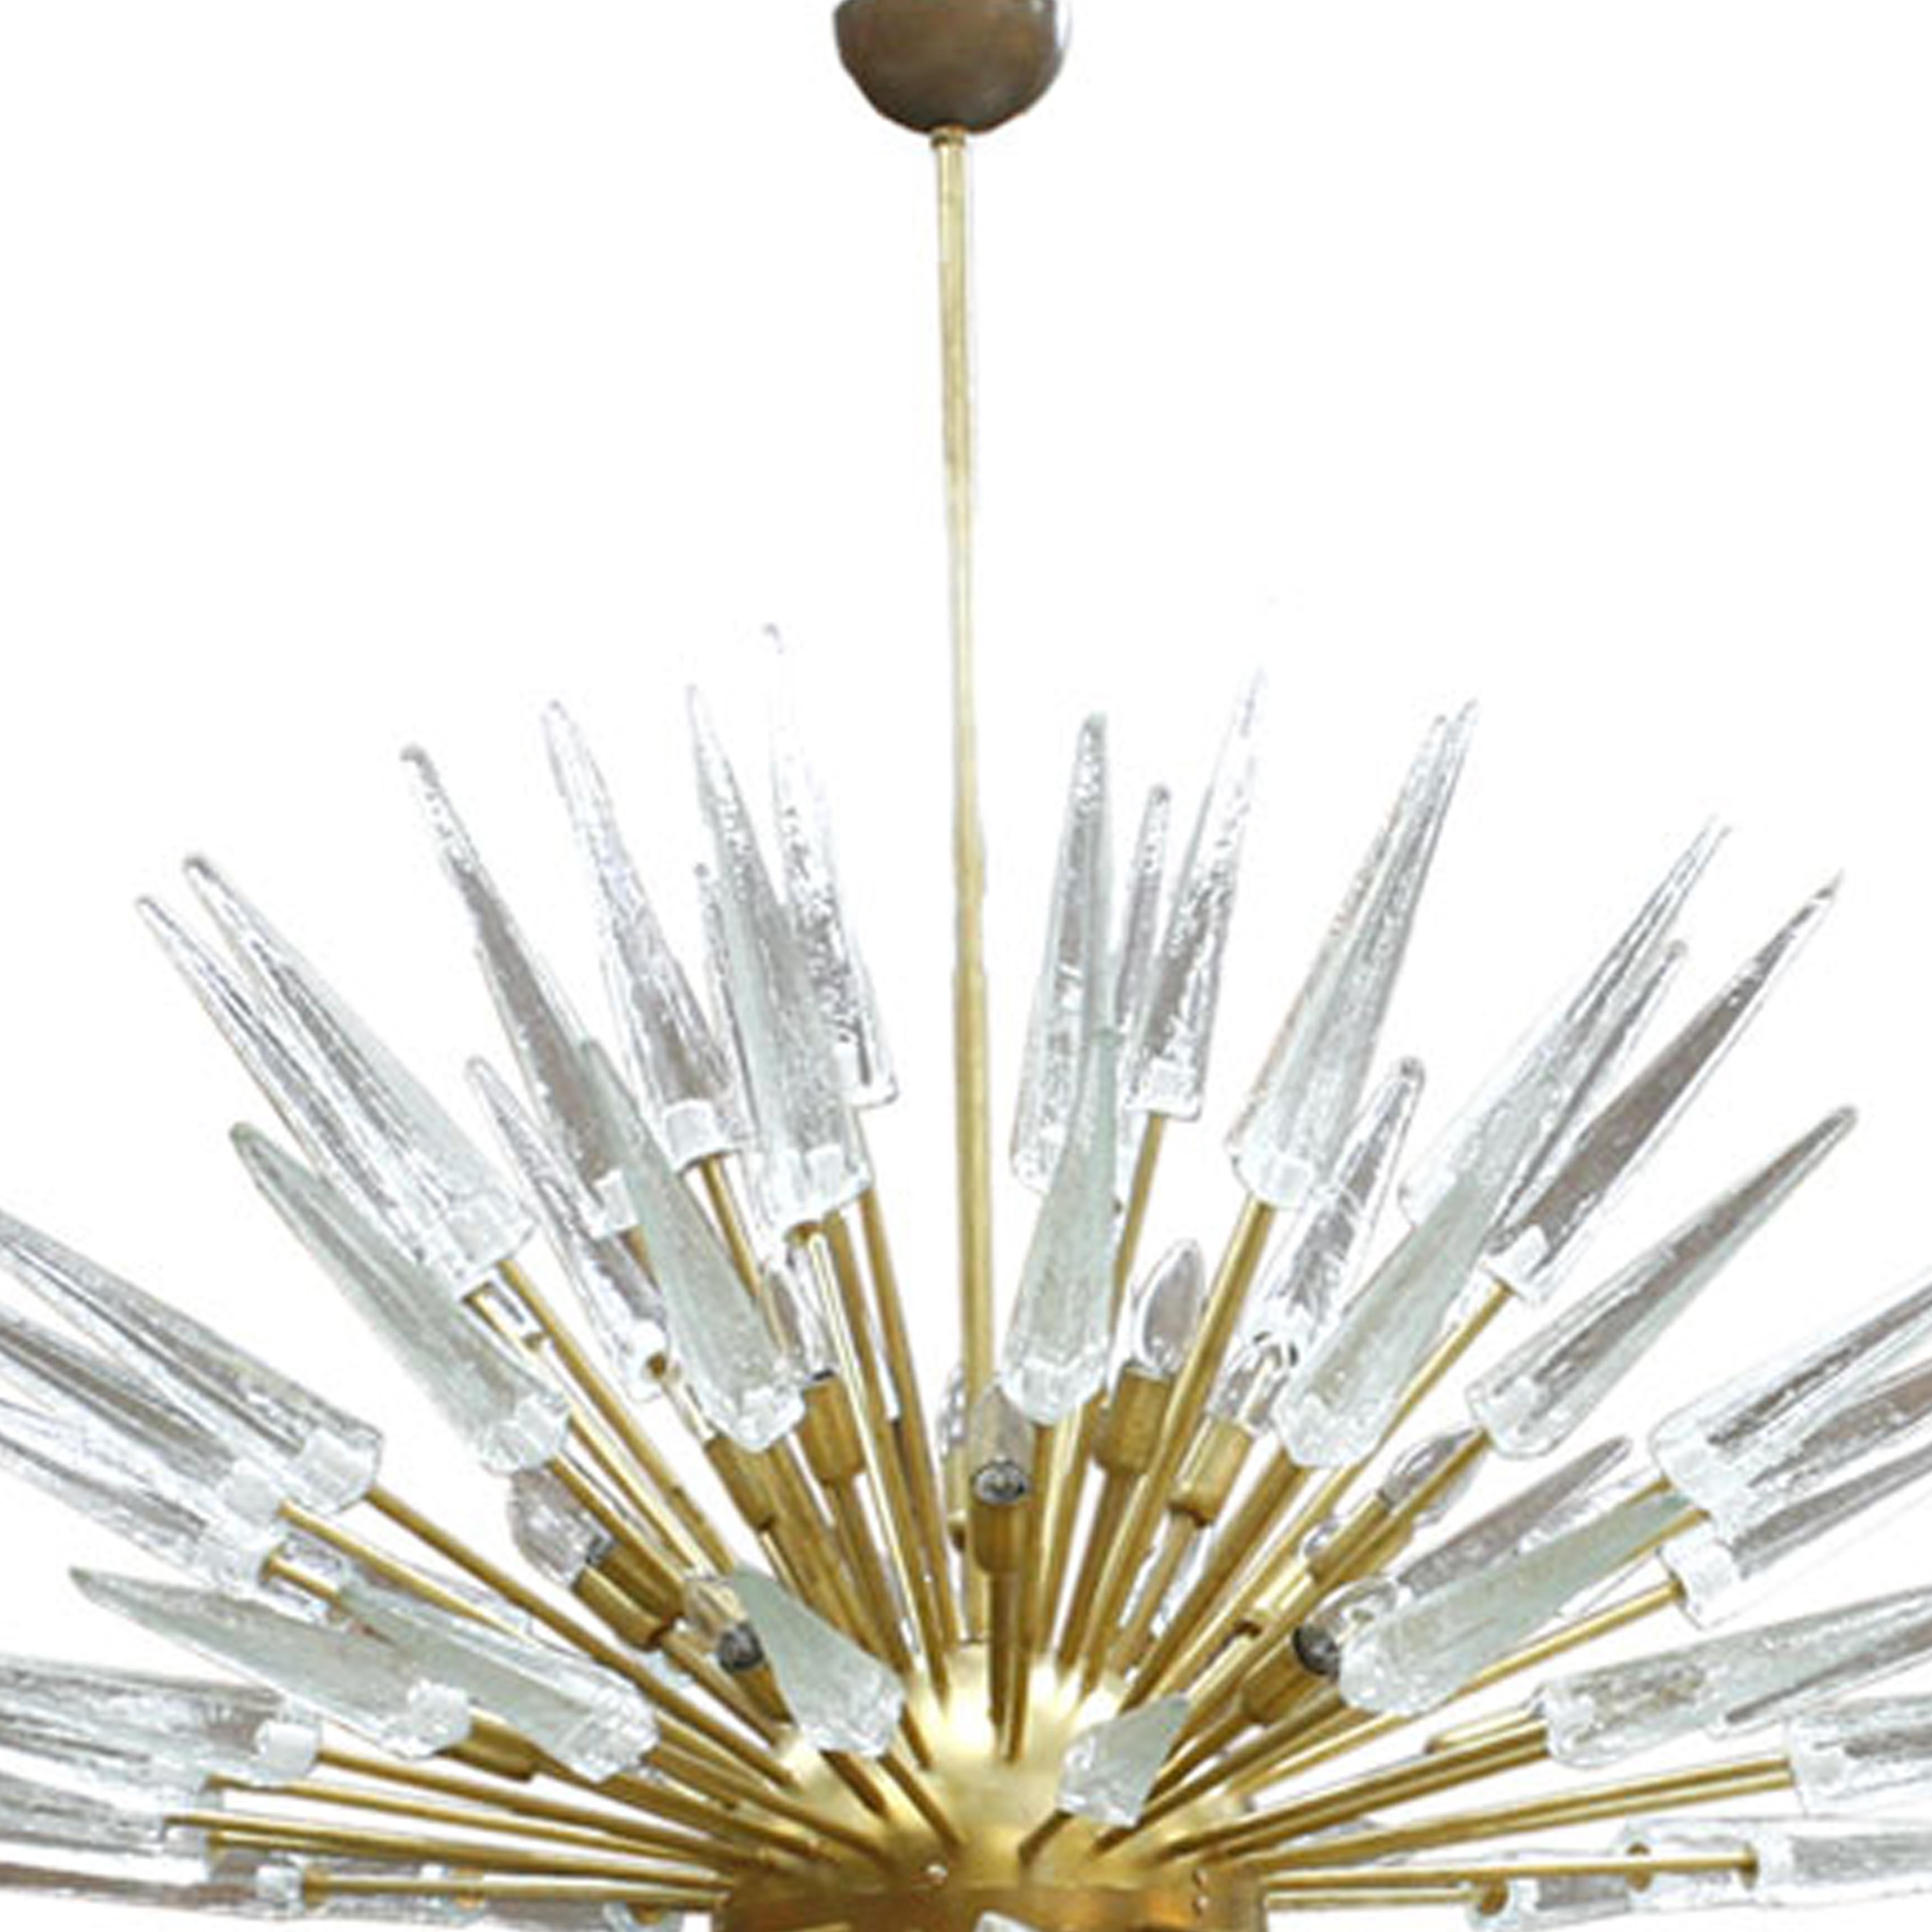 An impressive and very large Sputnik chandelier made of clear Murano glass shards and brass rods fixed to a central brass lacquered orb. Bulbs are coming from the brass rods ends and hidden between the hallo of glass spikes. Made in Italy.

 
Our